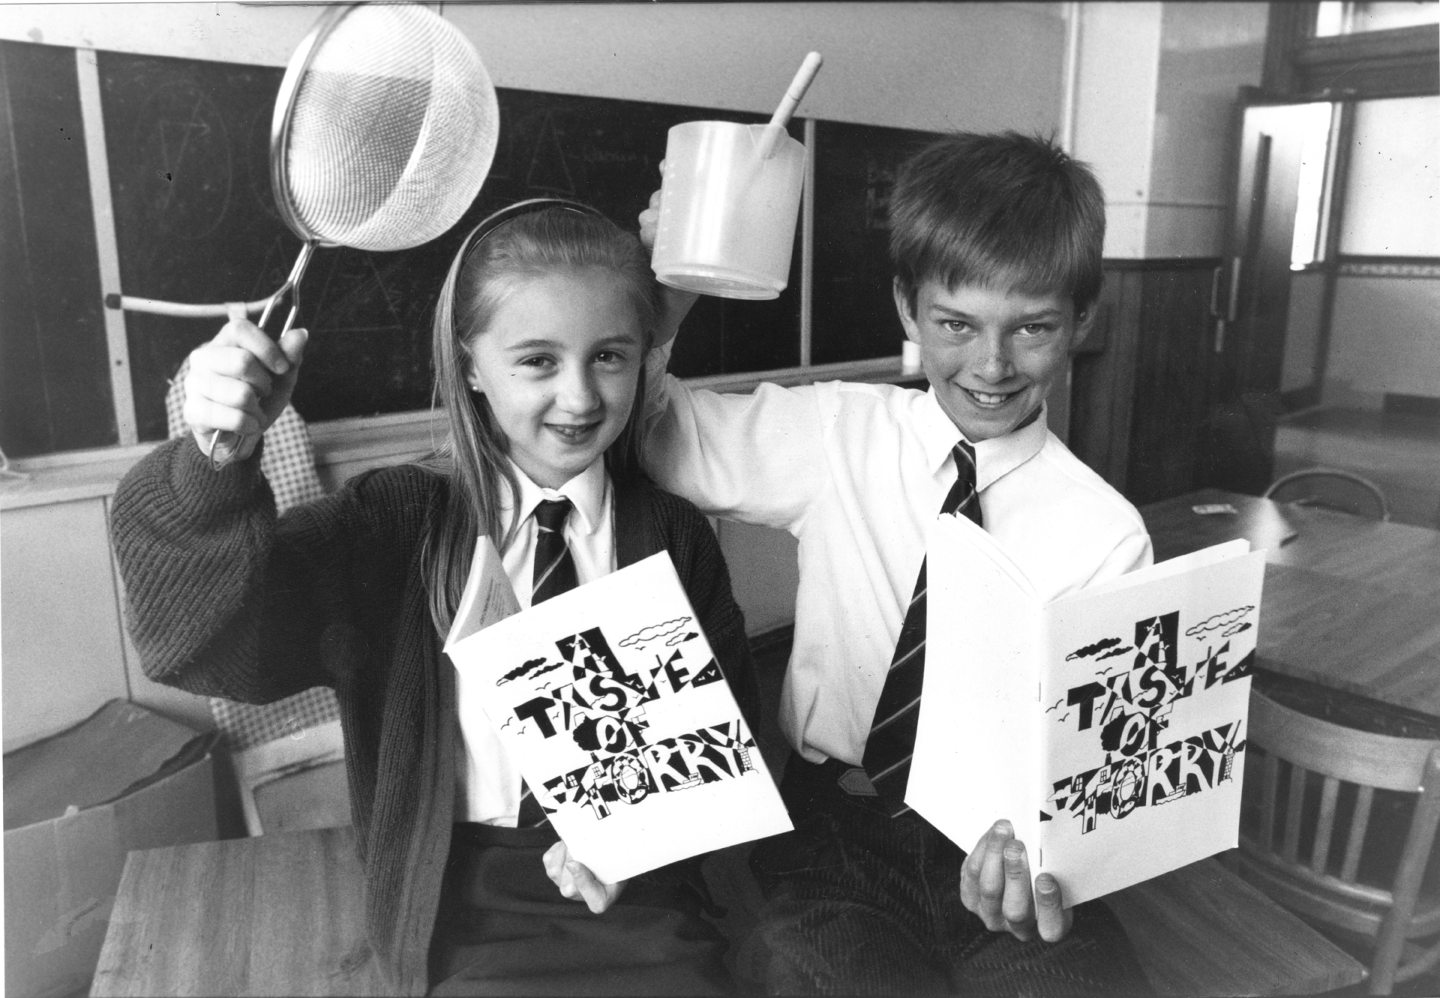 Two Primary 7 pupils at Walker Road, Mandy Vincent and Simon Joss, who cooked up a winning recipe book entitled 'A taste of Torry' in 1992.